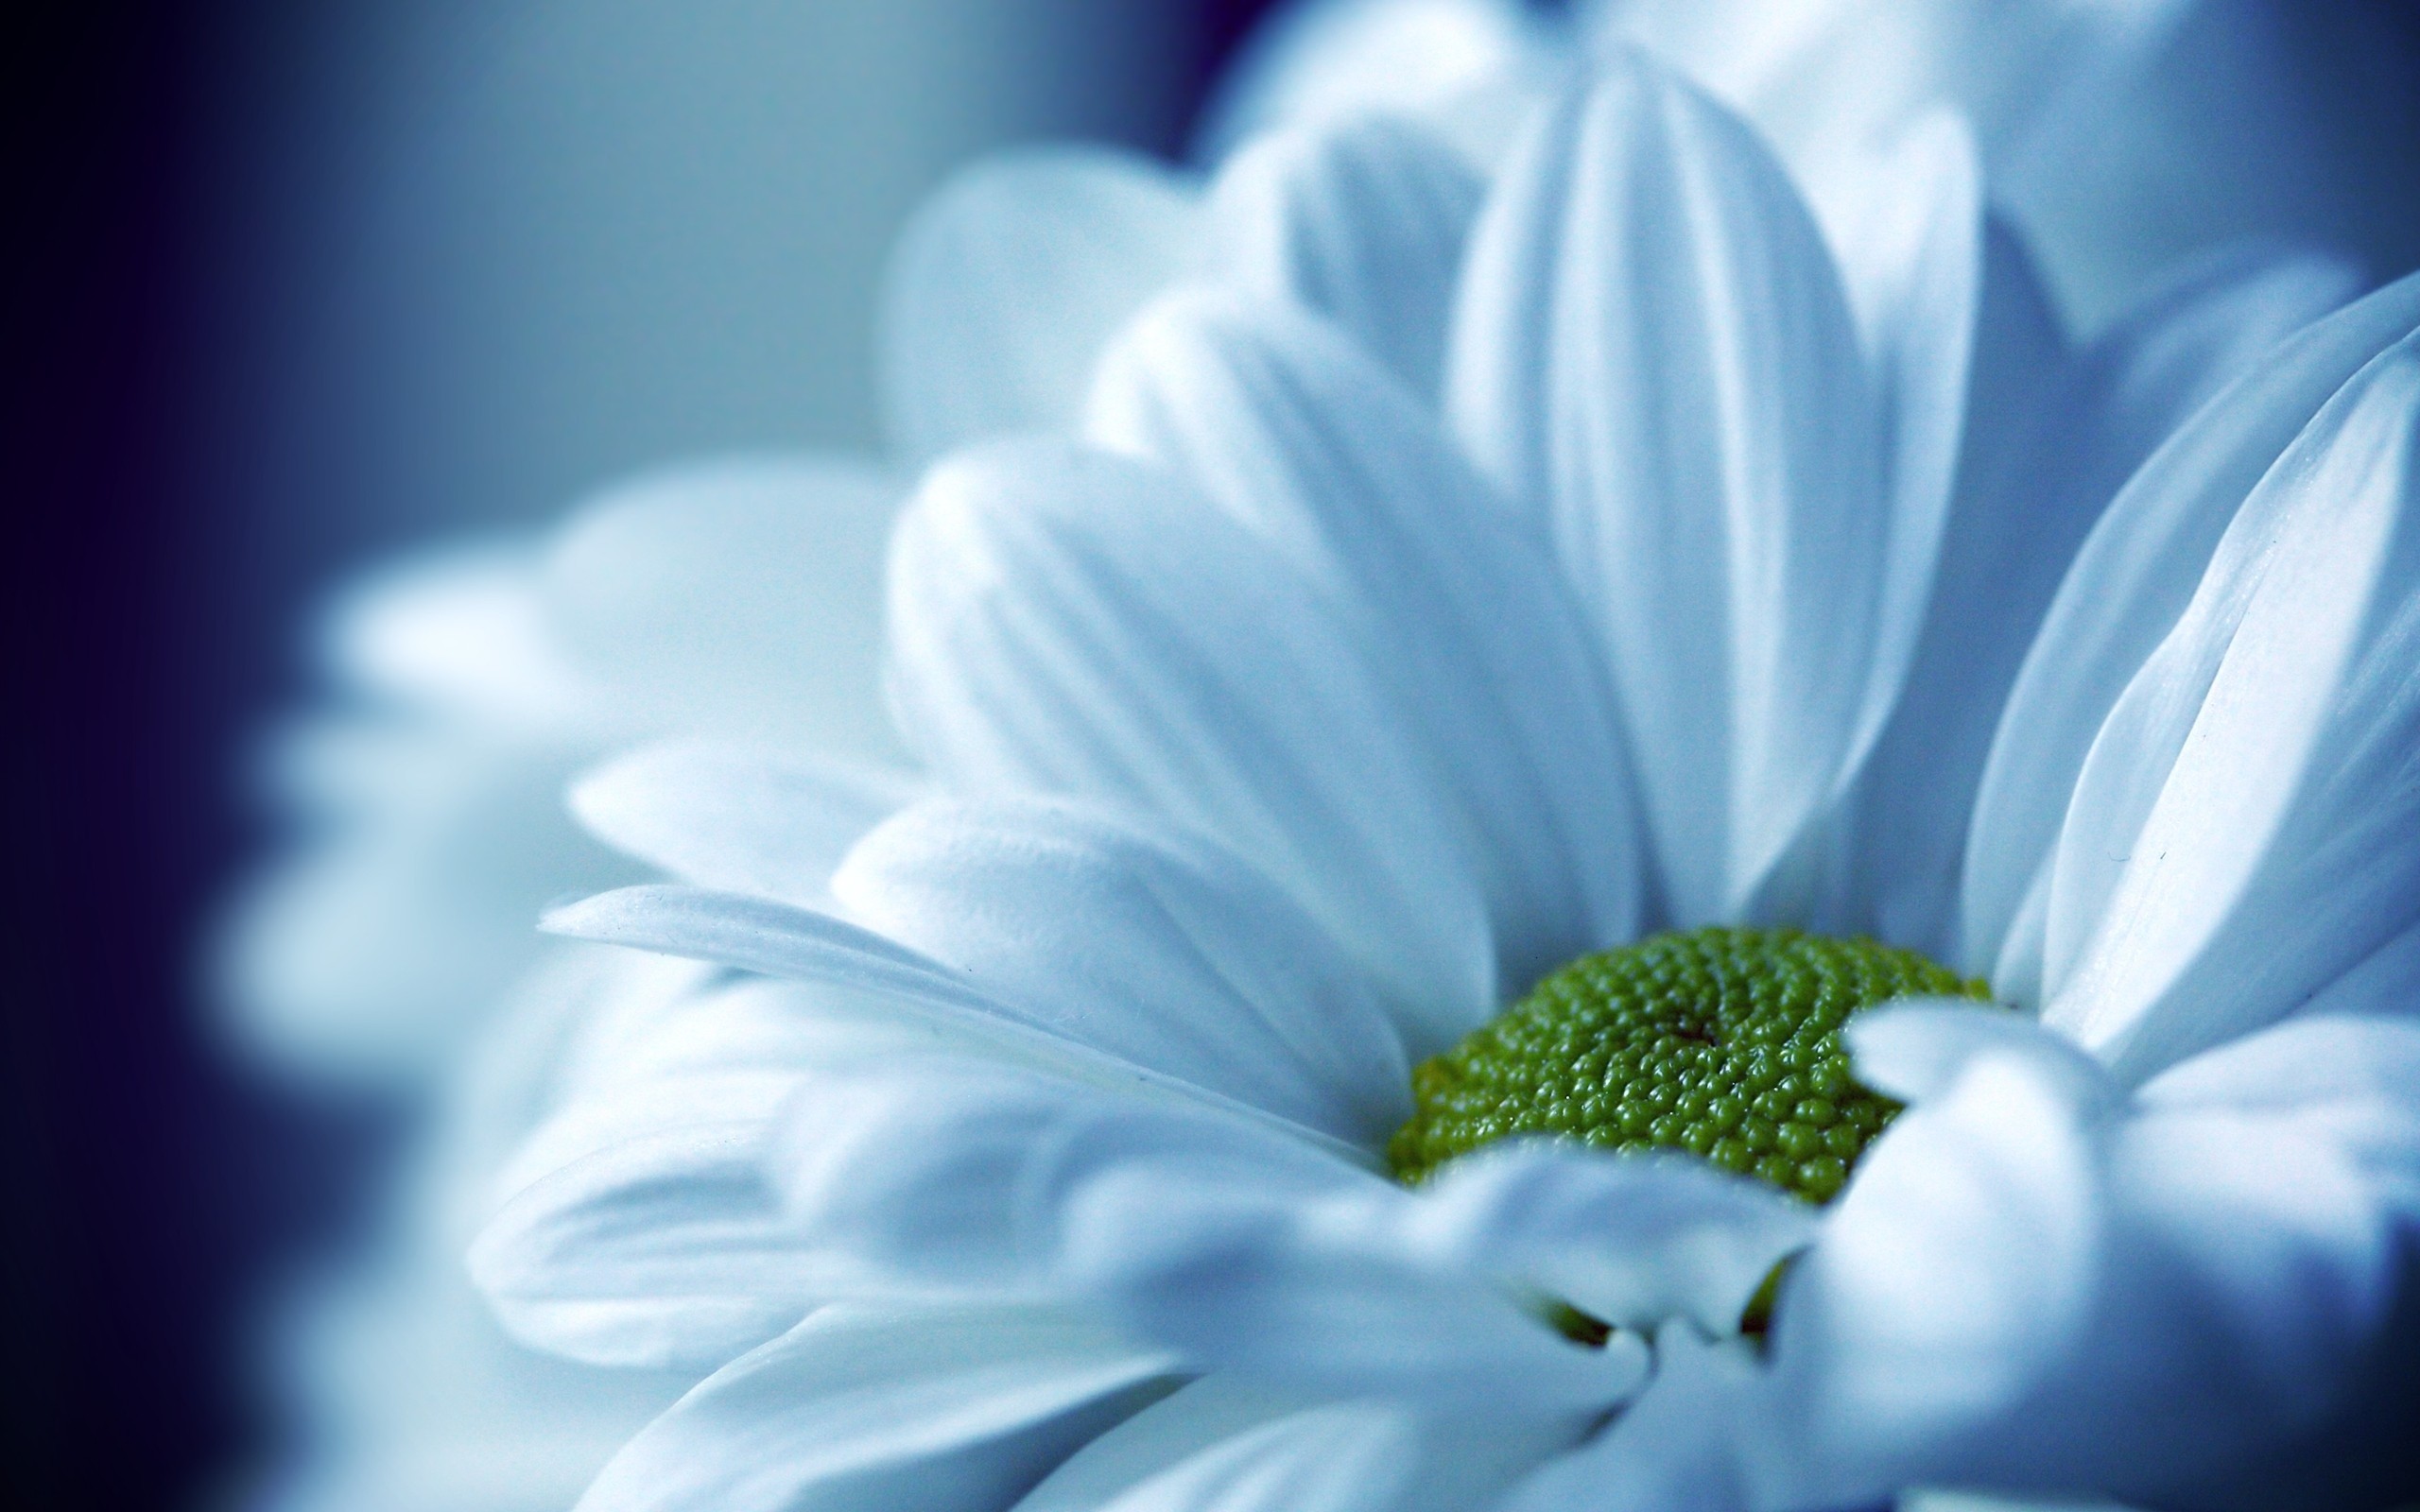 2560x1600 Find out: Beautiful White Flower Petals wallpaper on http://hdpicorner.com